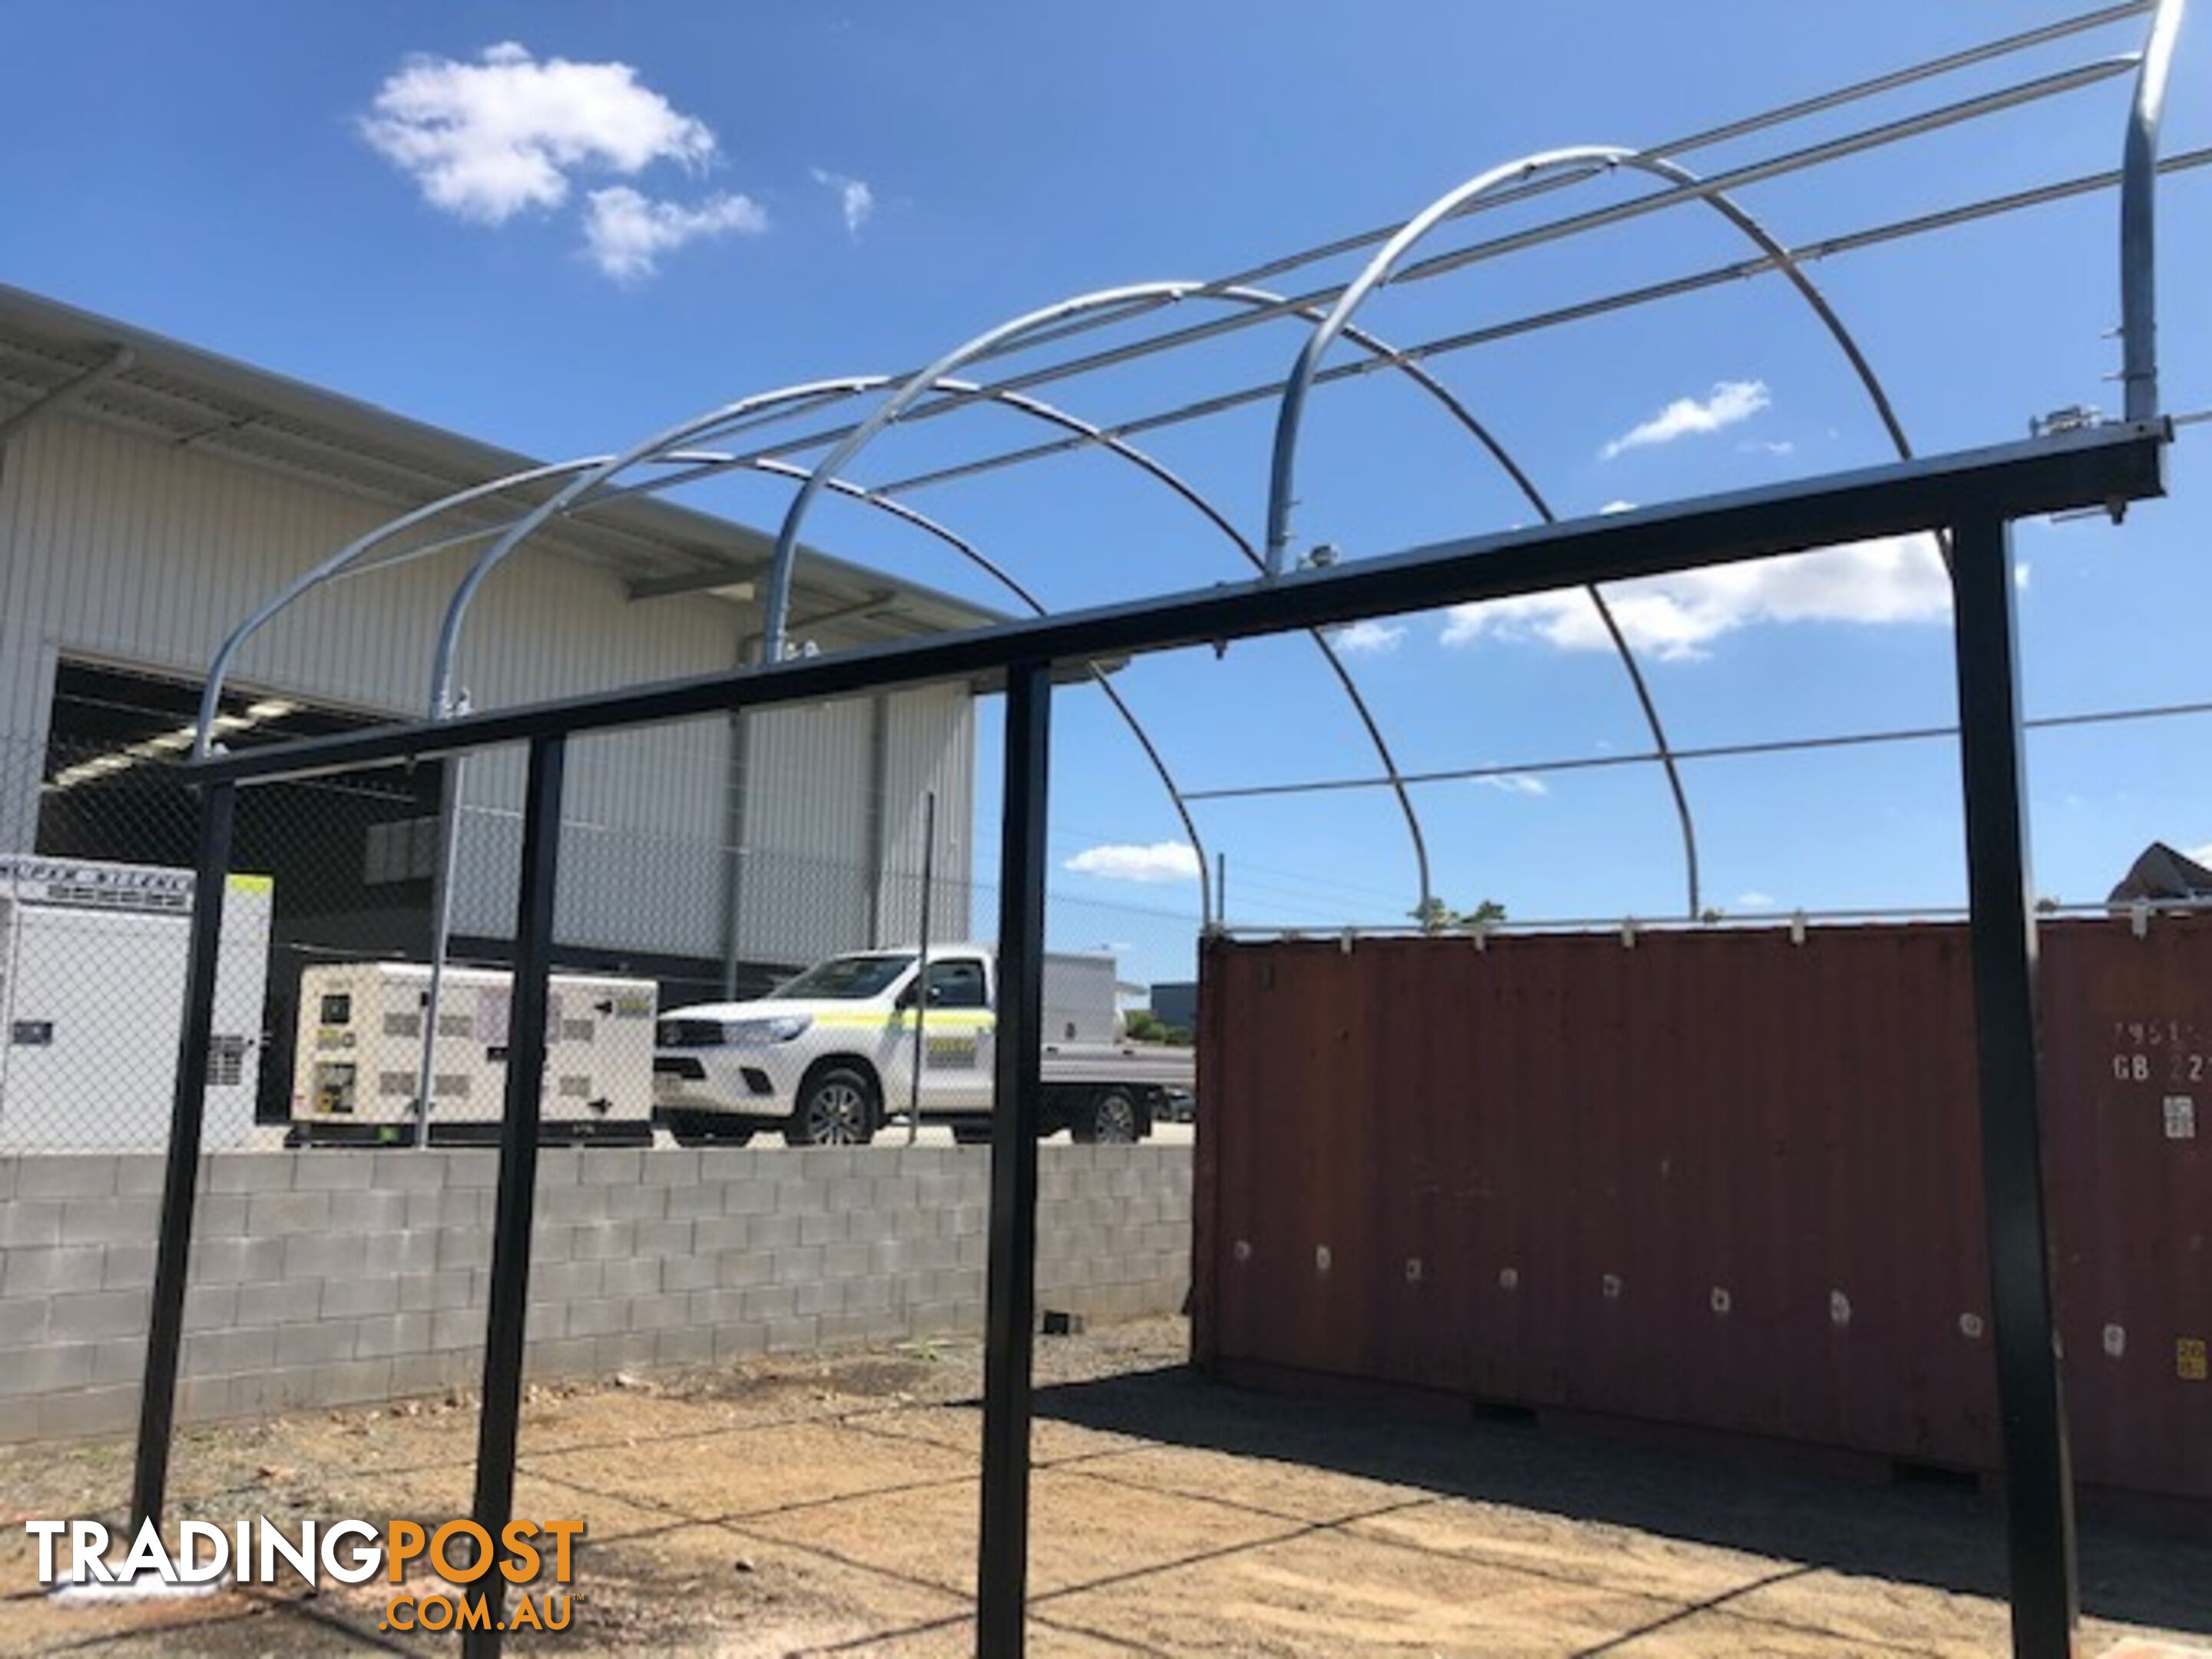 New 6m x 6m Container Shelter Workshop Igloo Dome